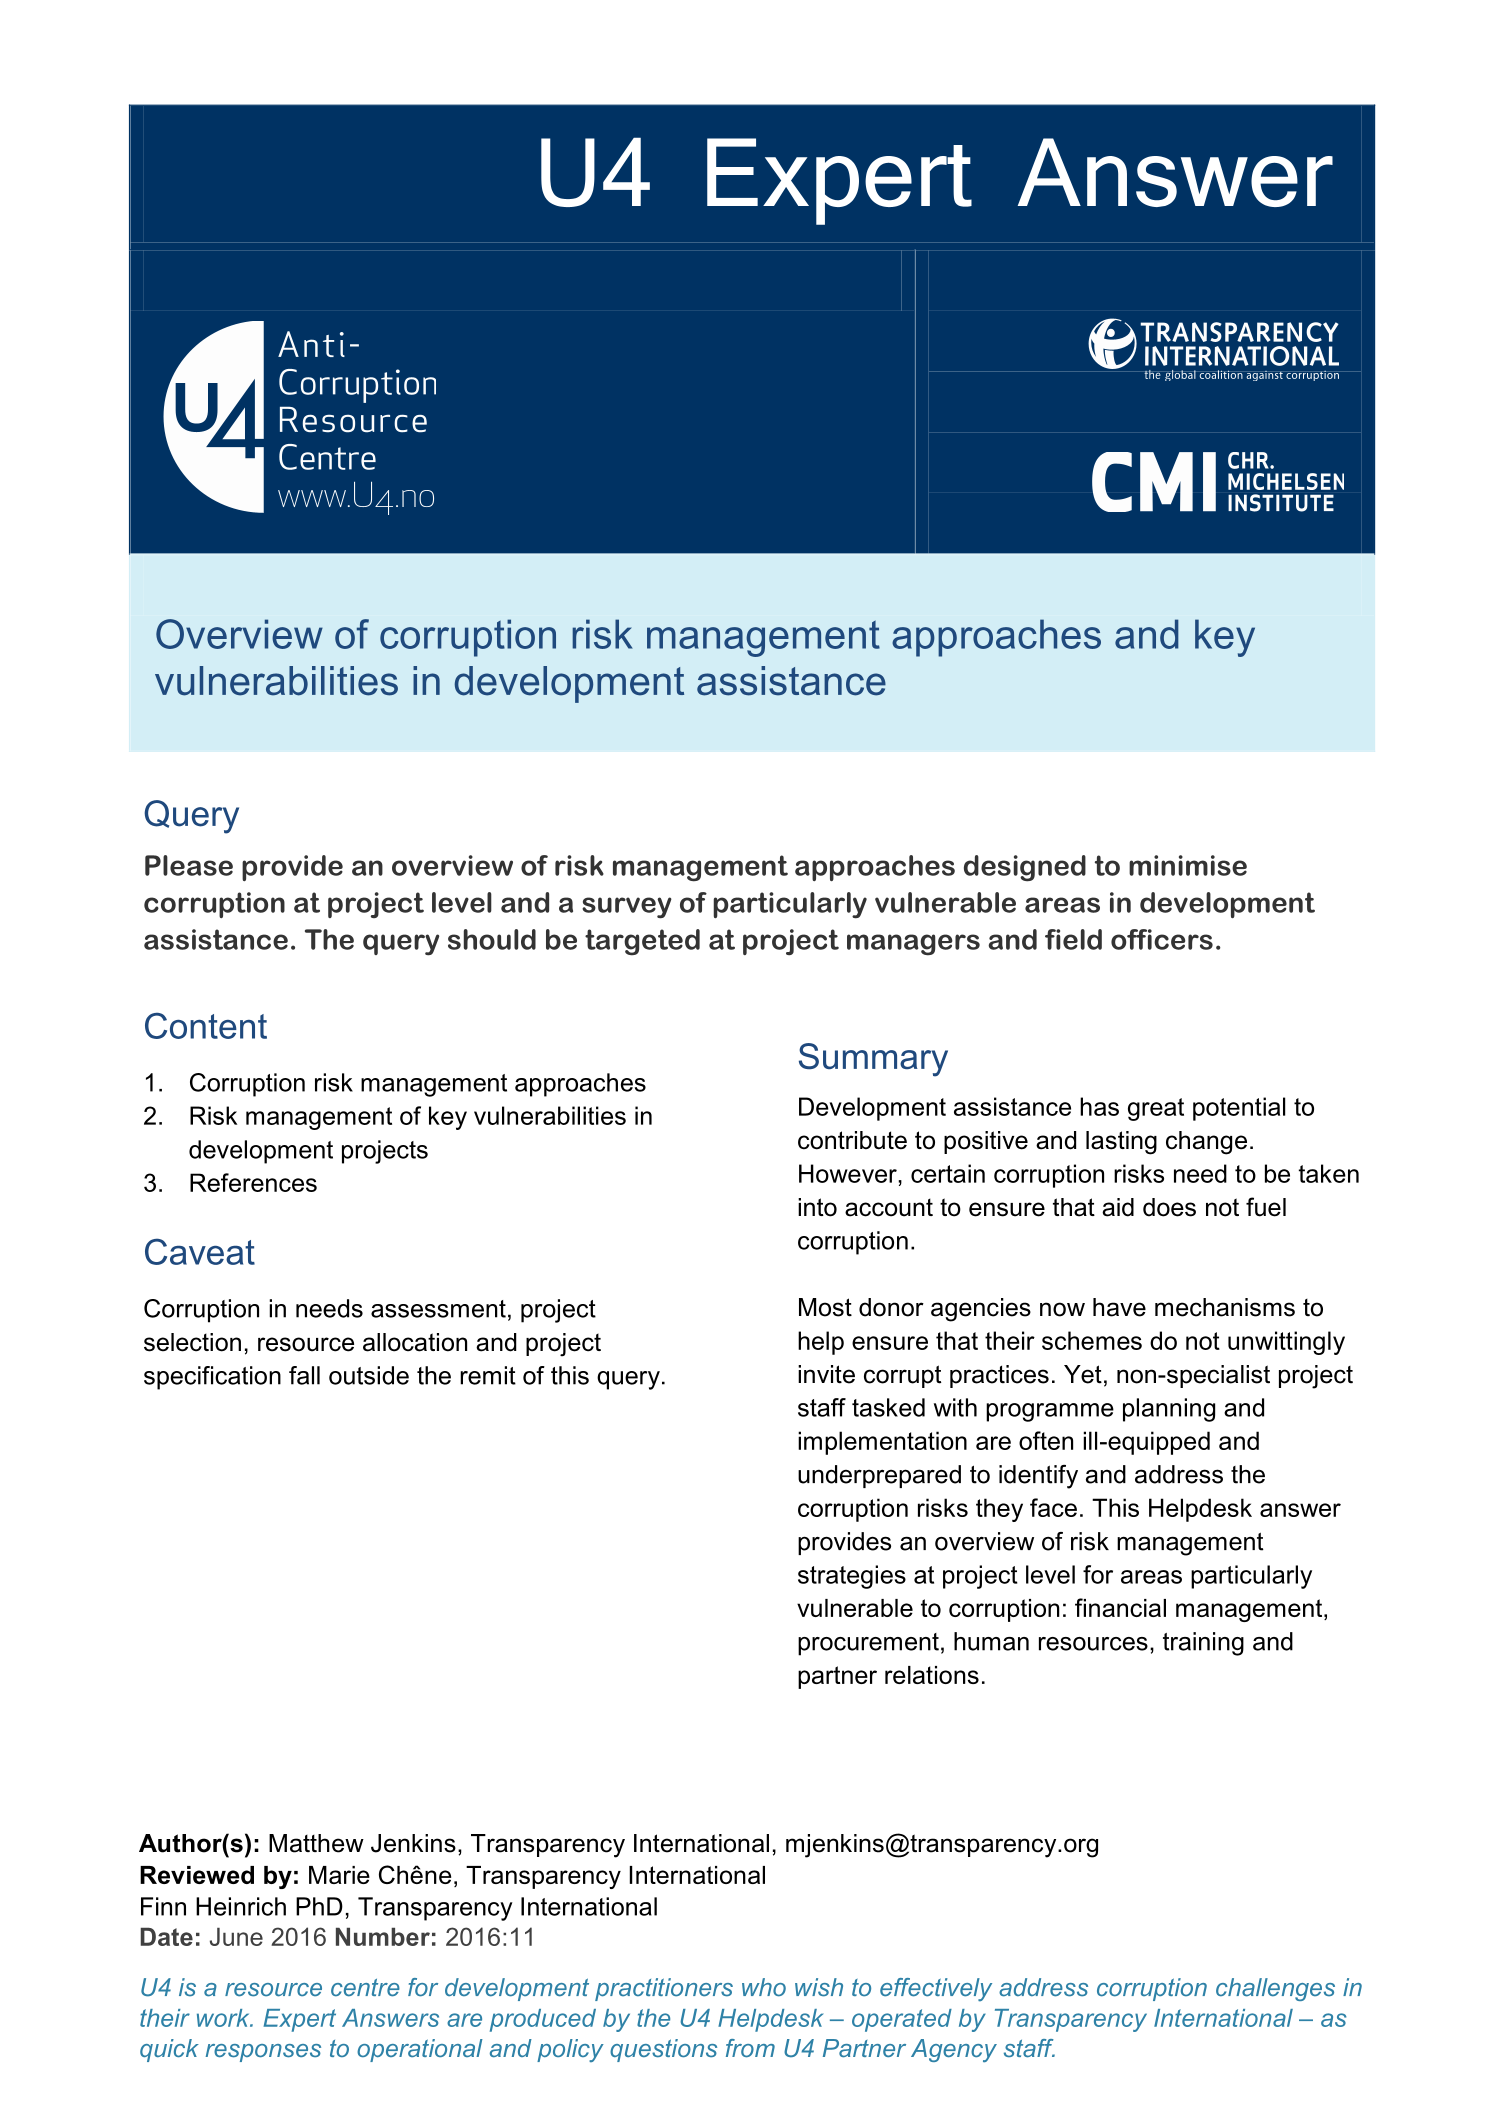 Overview of corruption risk management approaches and key vulnerabilities in development assistance